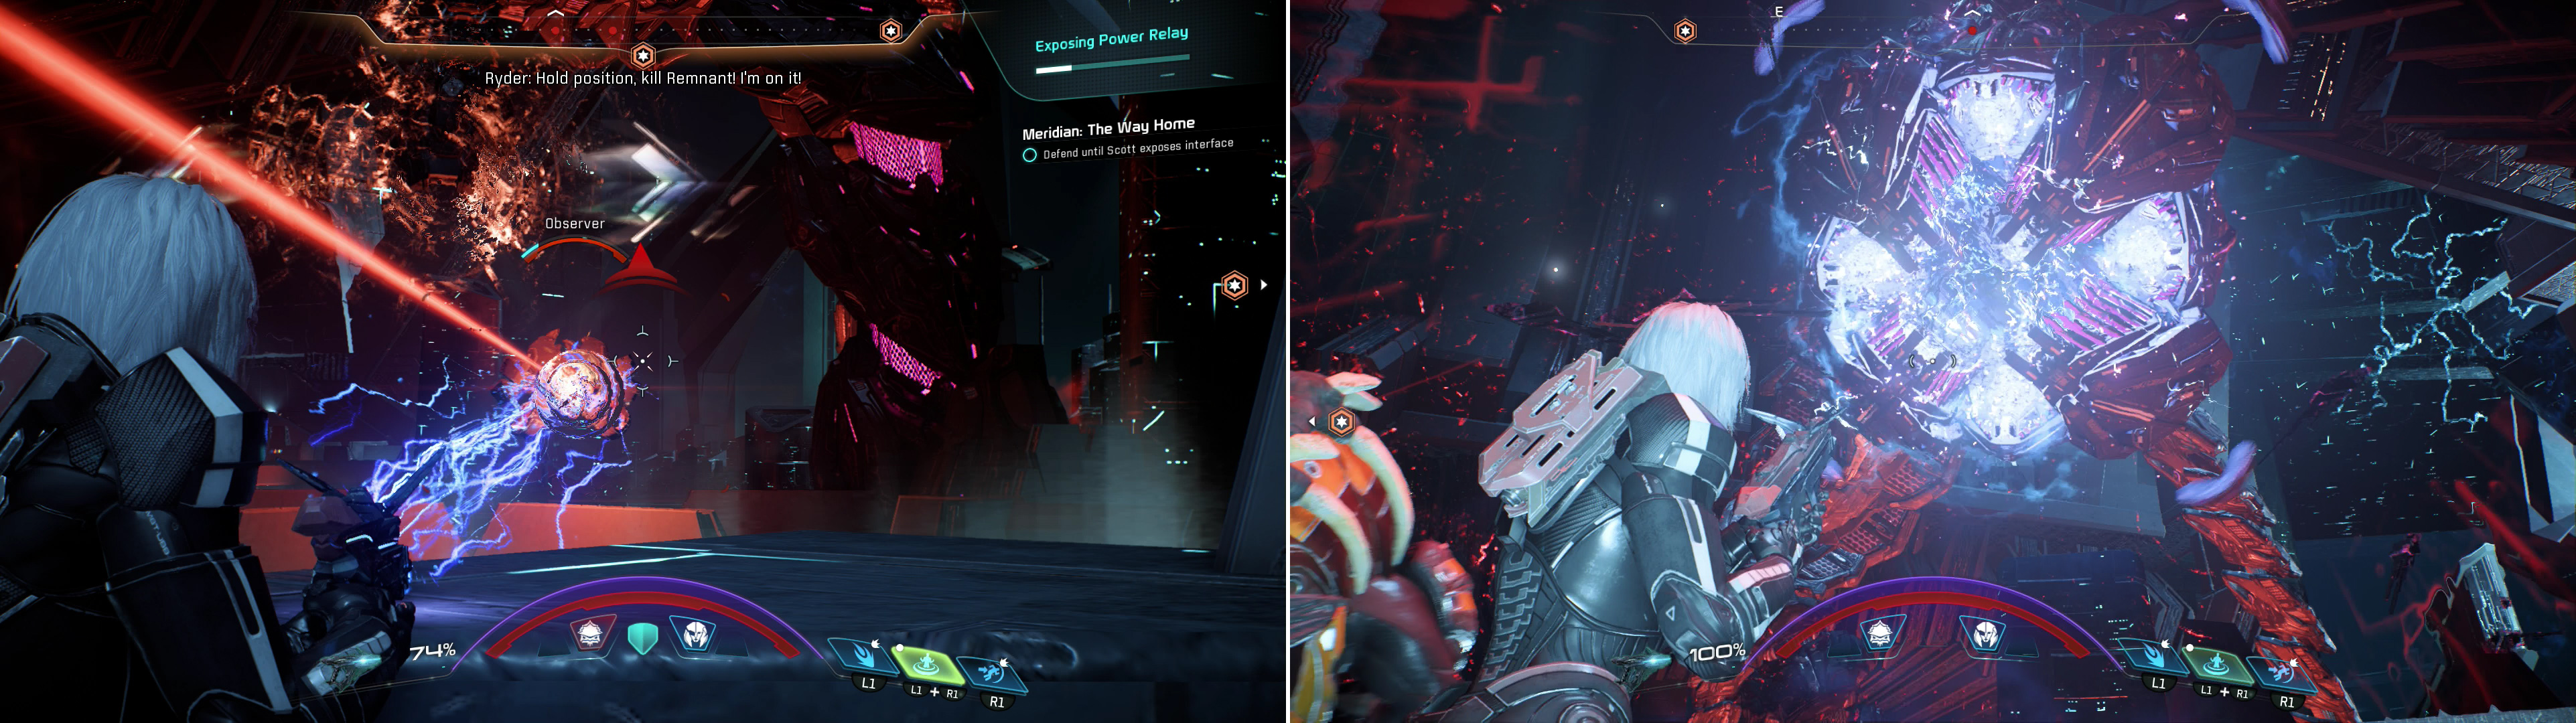 Reach the first Power Relay and fight off the Remnant that attack (left), but be wary of the Archons charged laser, as it penetrates cover (right).